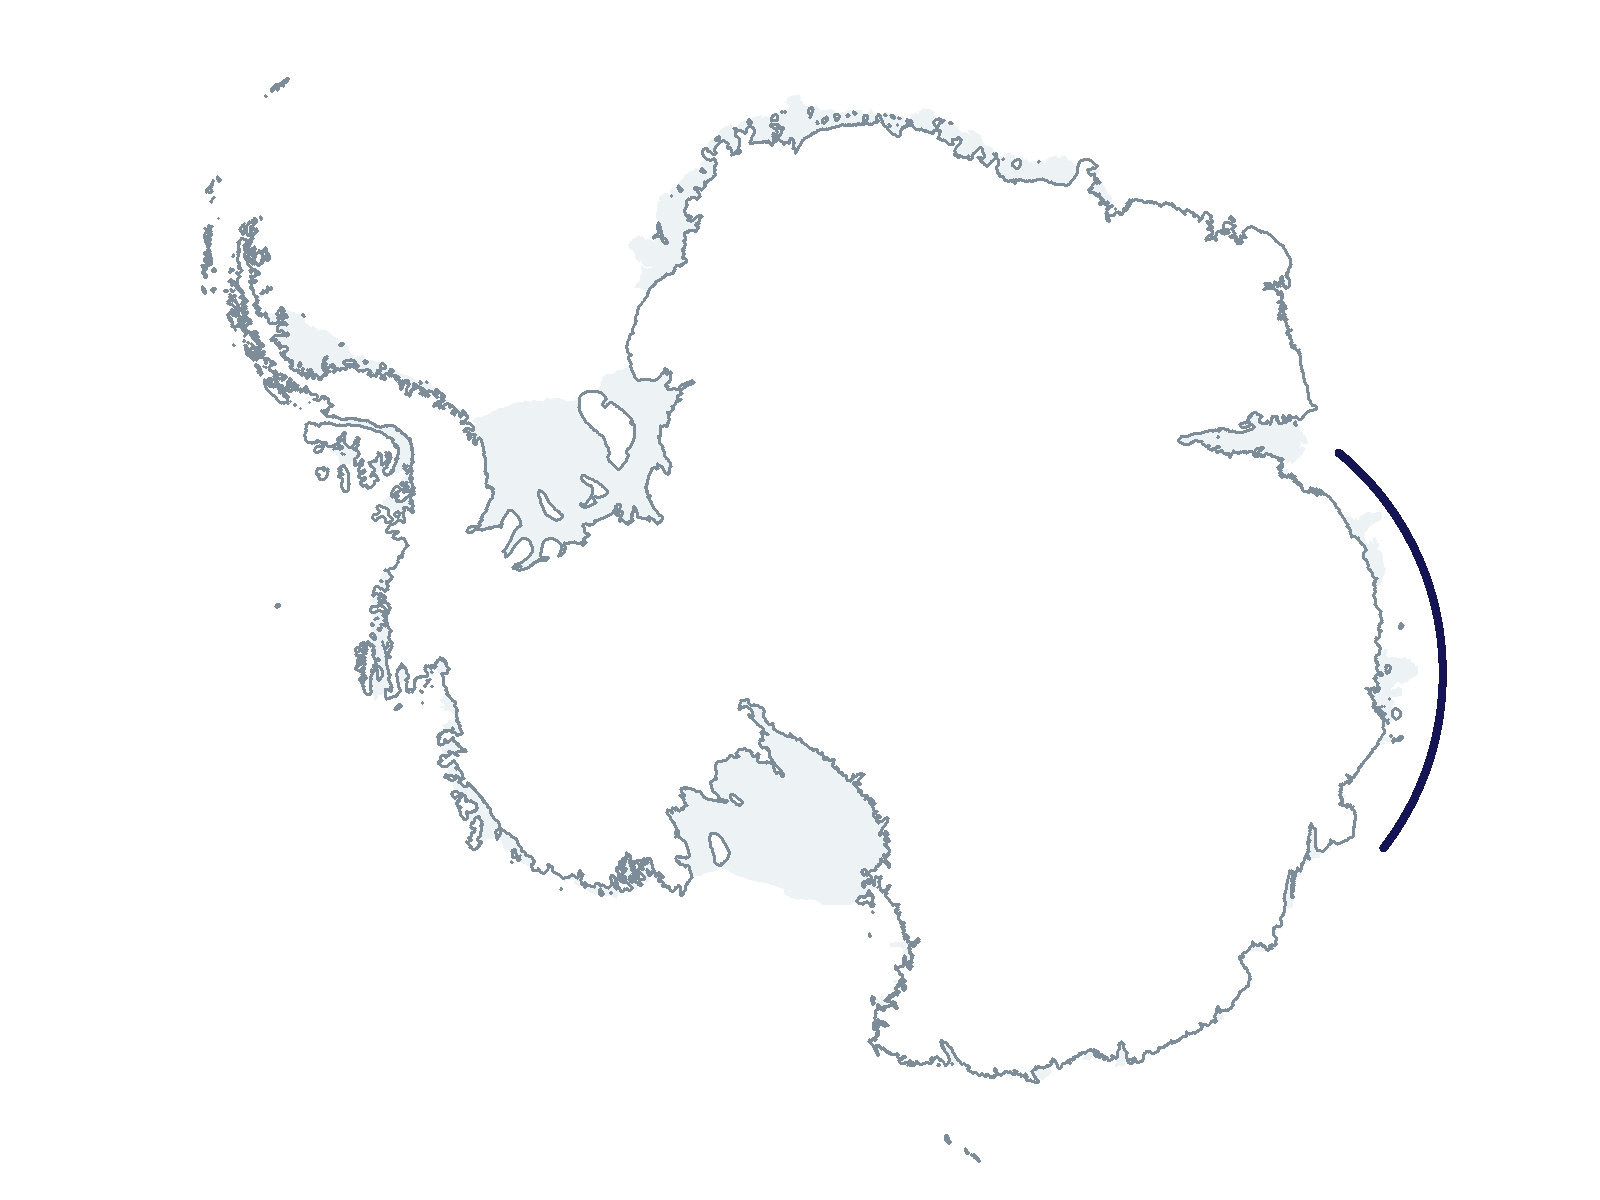 B-252-N Research Location(s): East Antarctica